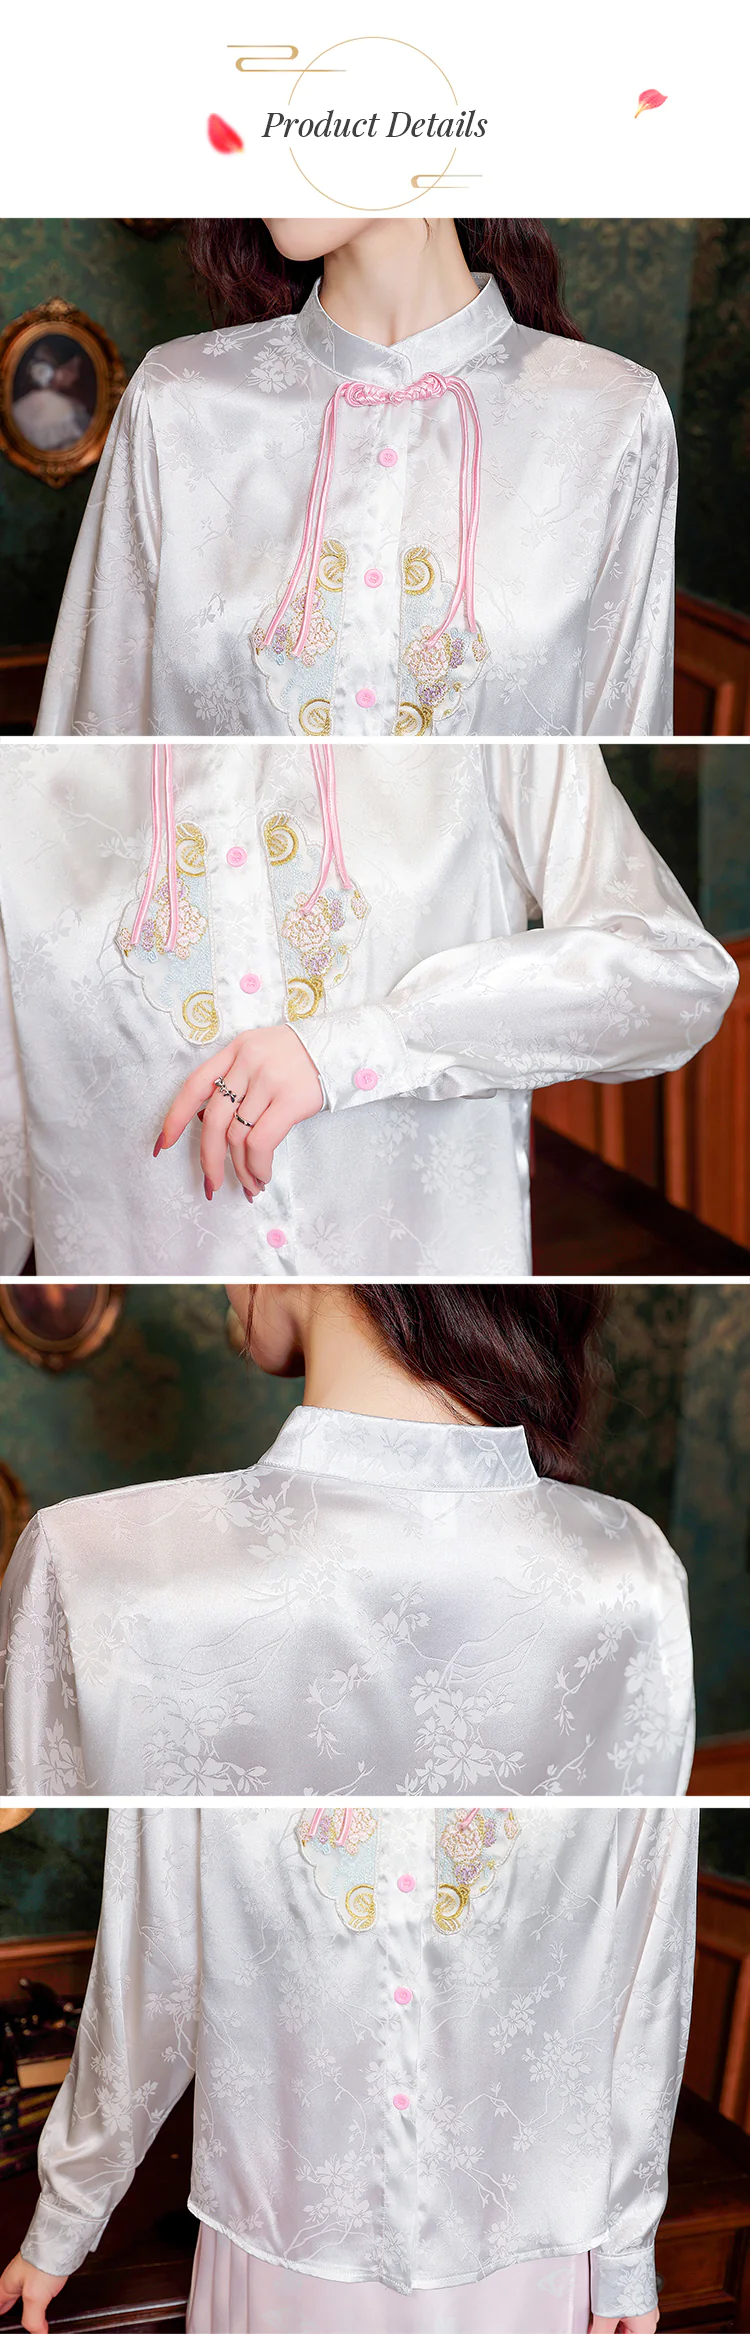 Womens-Delicate-Vintage-Spring-Embroidery-Jacquard-Shirt19